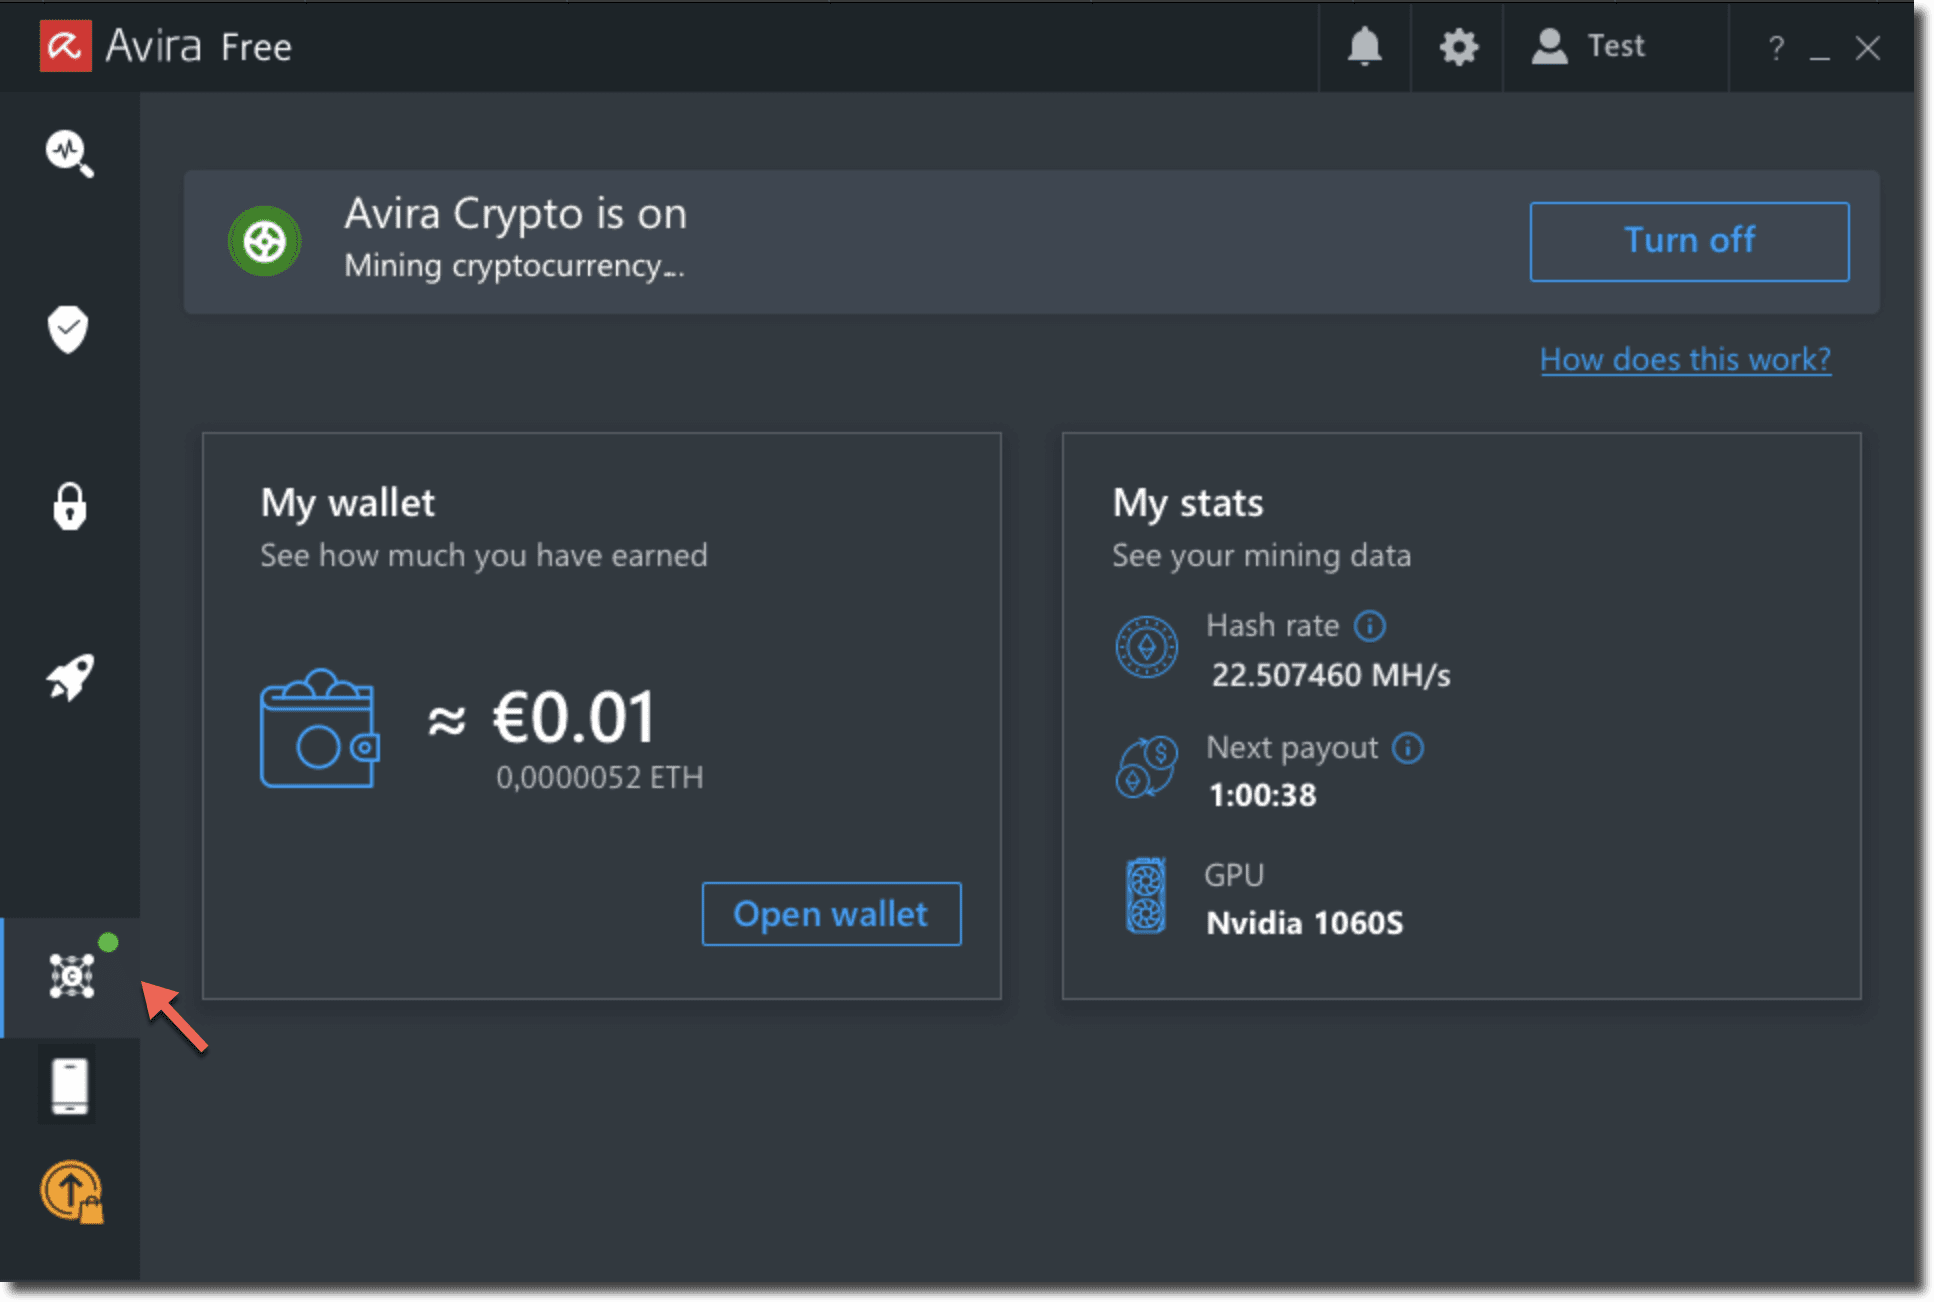 Avira is adding a crypto miner to its products as well